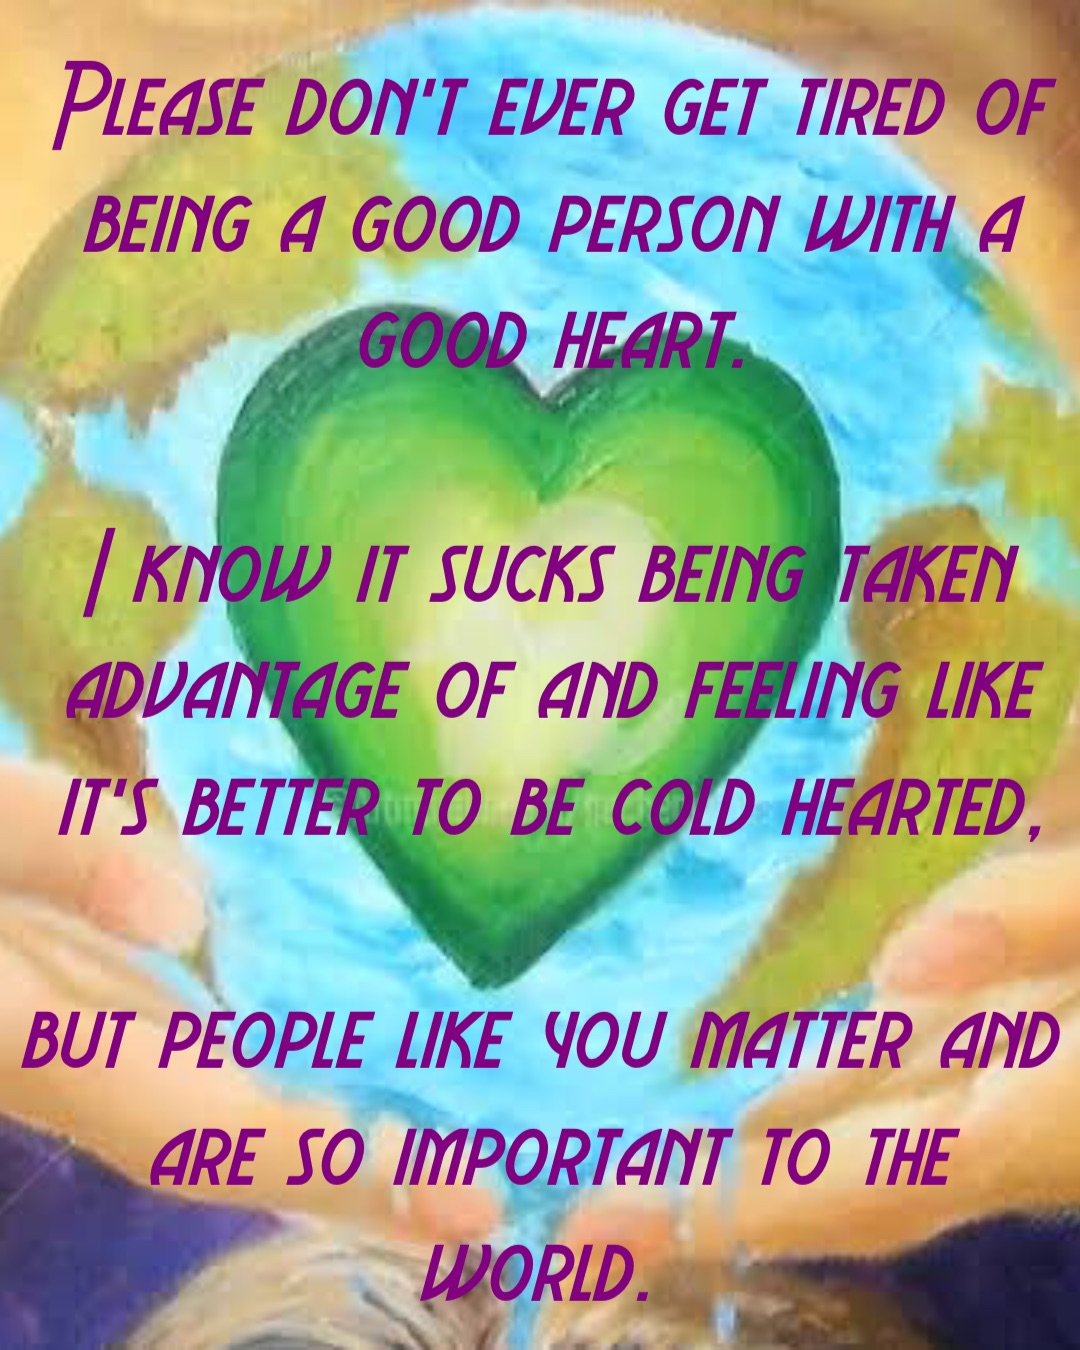 Please don’t ever get tired of being a good person with a good heart. 

I know it sucks being taken advantage of and feeling like it’s better to be cold hearted, 

but people like you matter and are so important to the world.